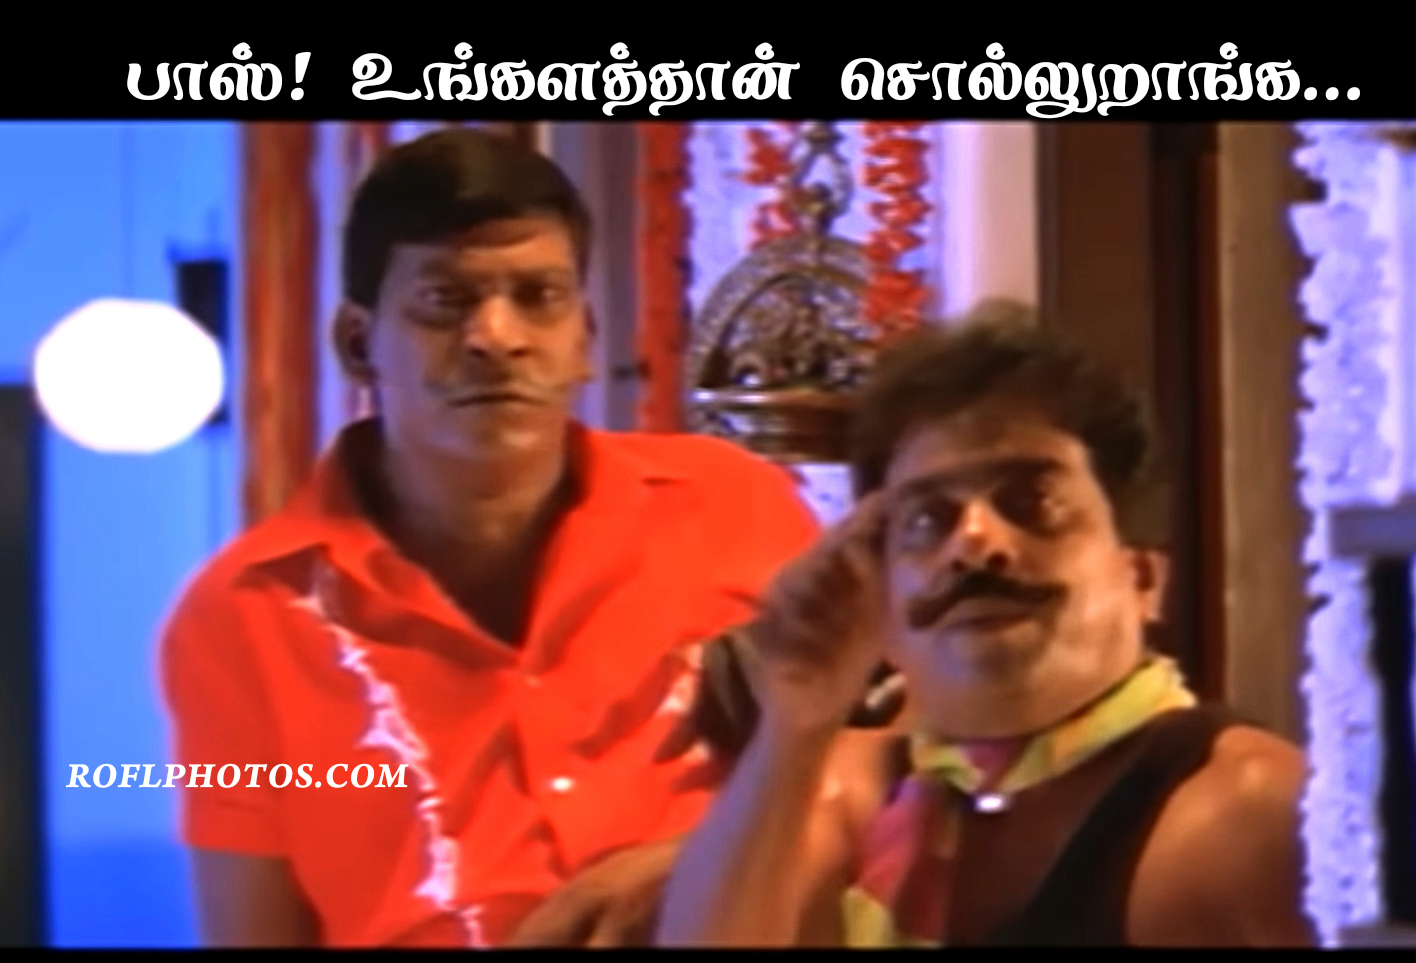 Tamil Comedy Memes Vadivelu Memes Images Vadivelu Comedy Memes Download Tamil Funny Images With Dialogues Tamil Photo Comments Download Tamil Comedy Images With Commants Tamil Dialogues With Like share comment subscribe fb link : tamil comedy memes vadivelu memes